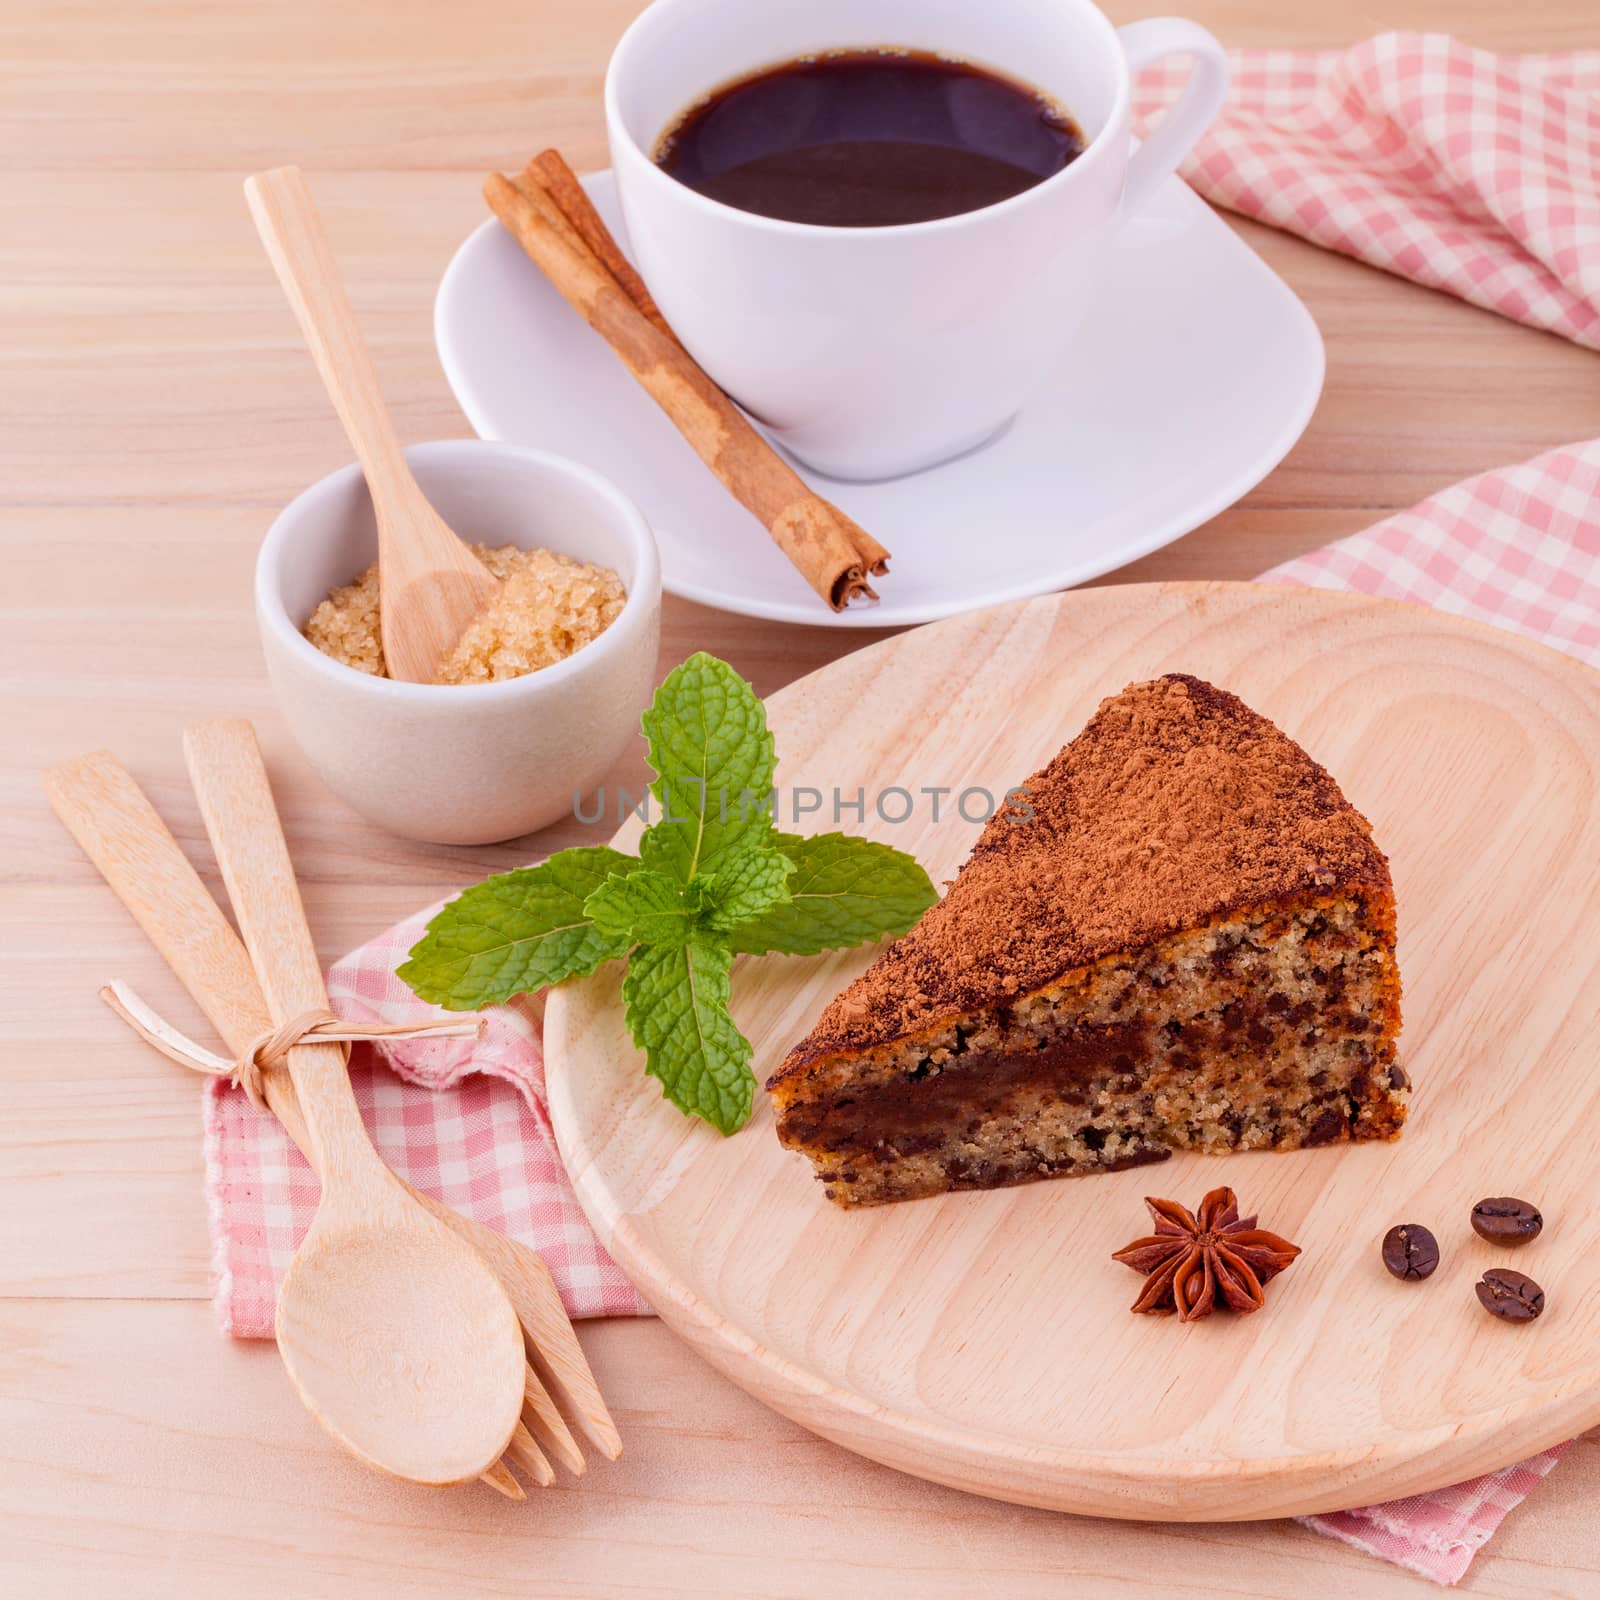 Homemade dark chocolate cake with cup of coffee on wooden background.